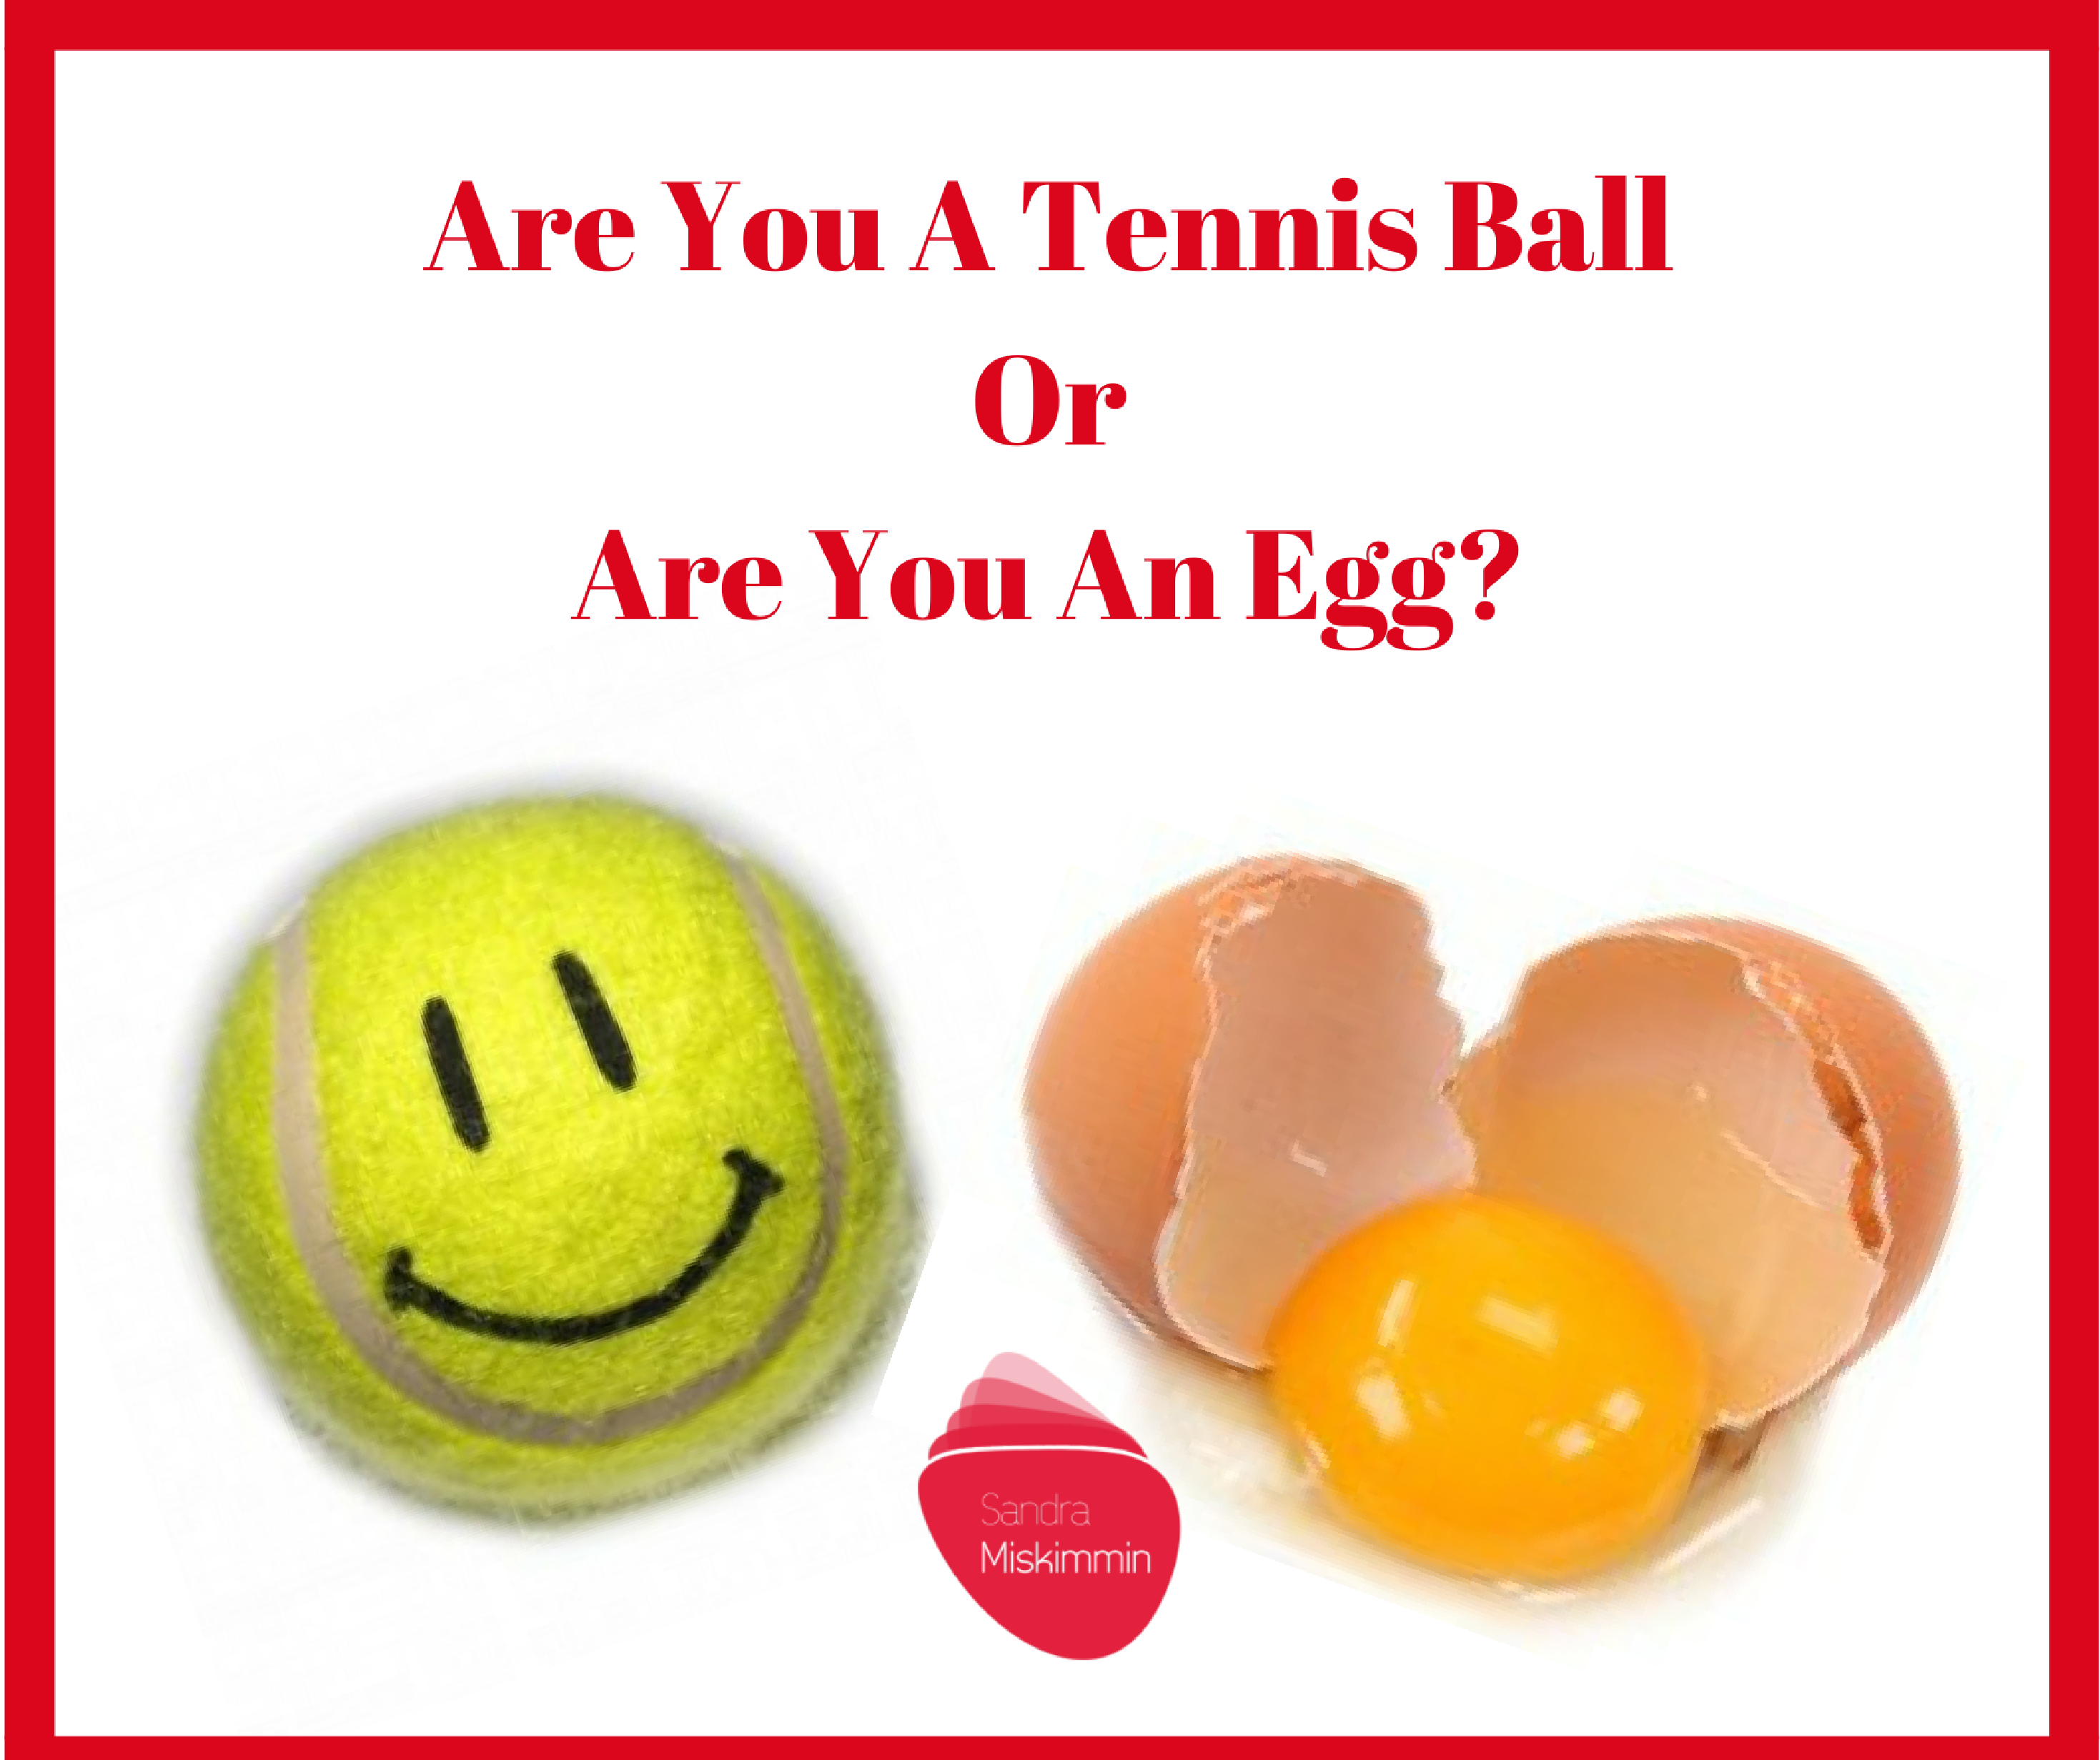 Are You A Tennis Ball or Are You An Egg?